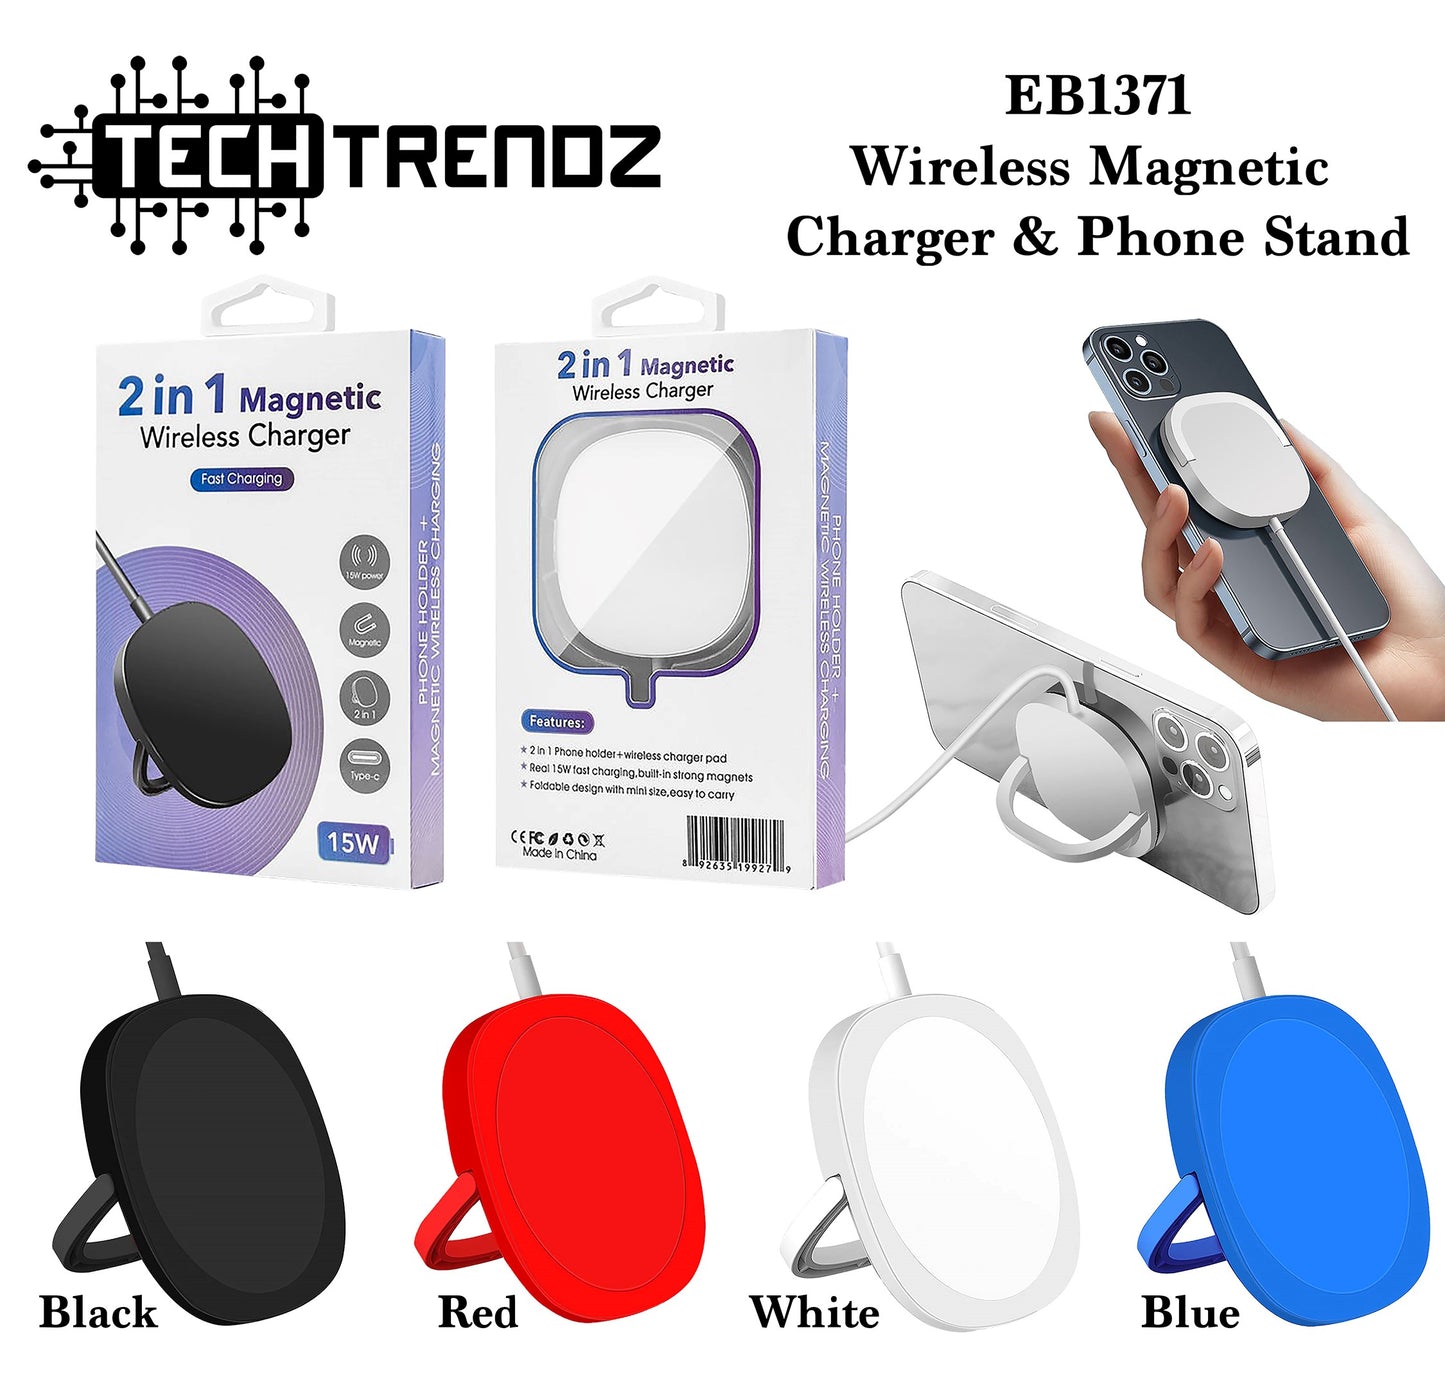 WIRELESS MAGNETIC CHARGER